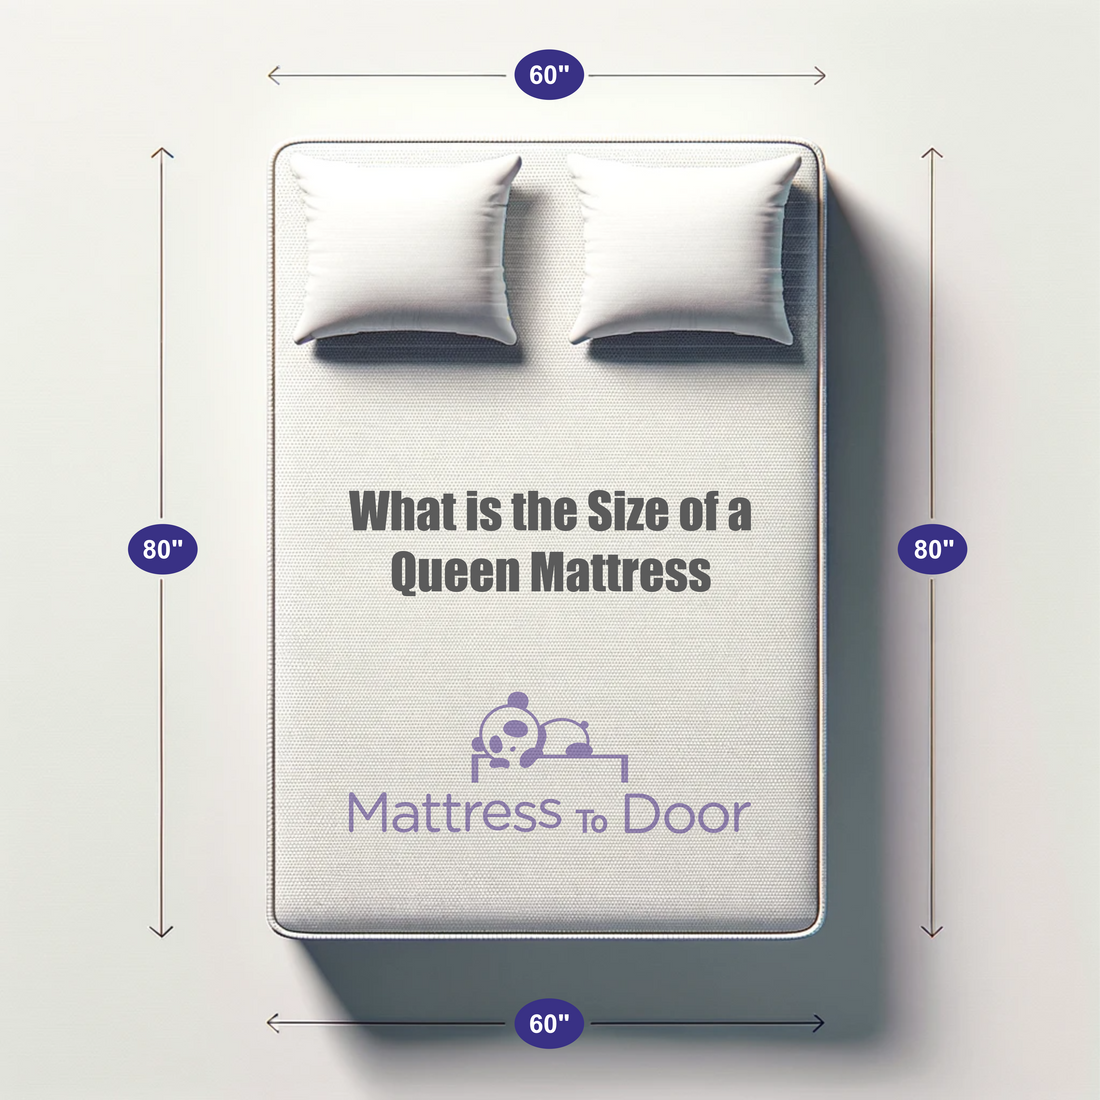 A queen mattress highlighted, providing a clear perspective on what is the size of a queen mattress for interested buyers.